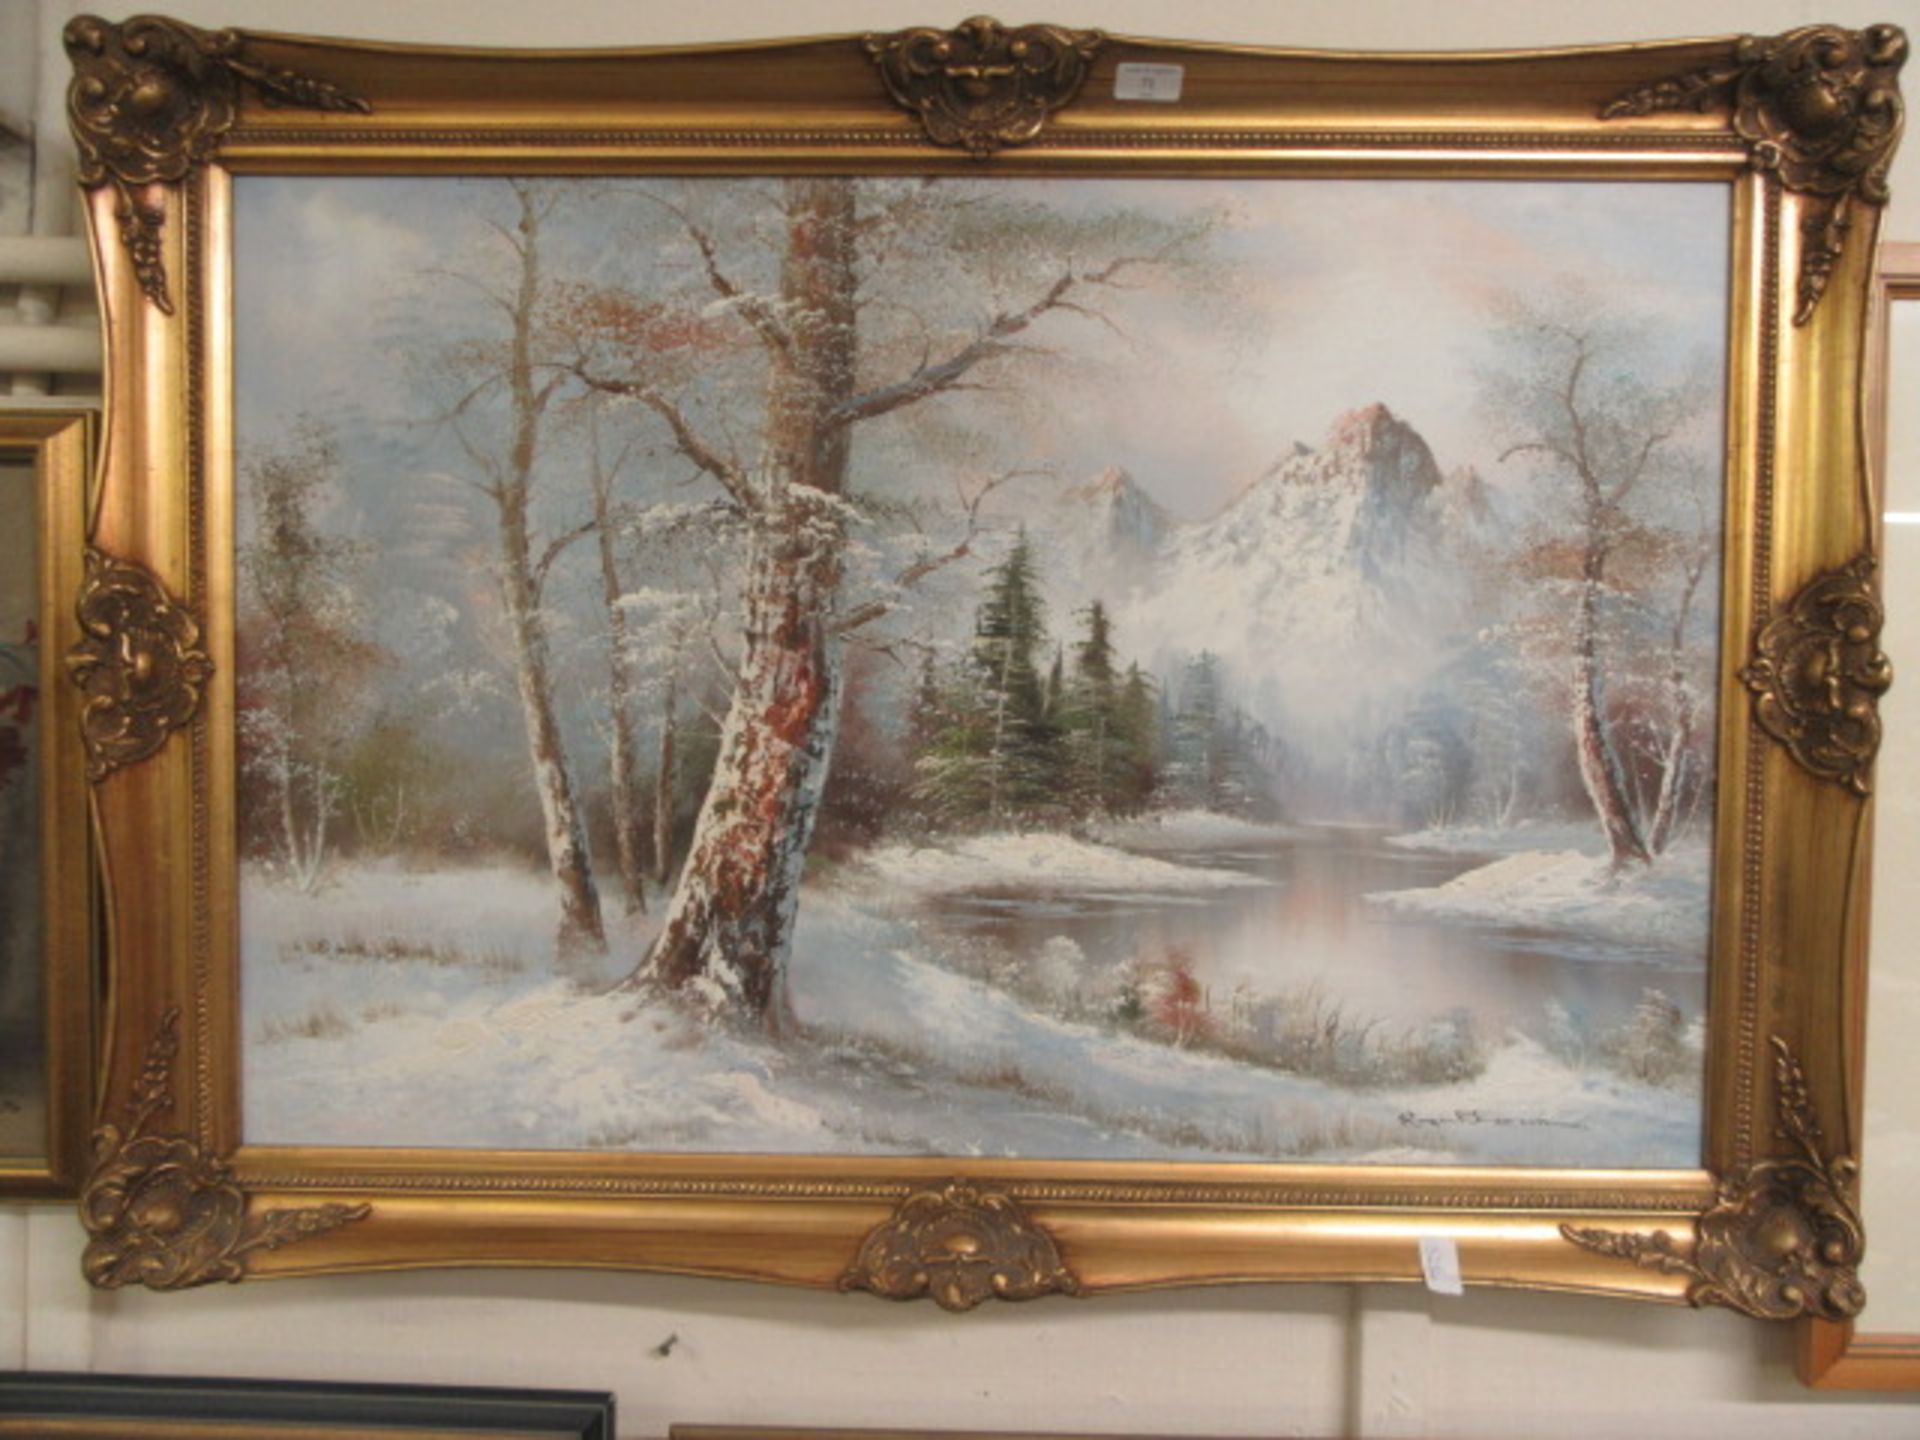 A gilt framed oil on canvas of snowy countryside scene signed bottom right CONDITION